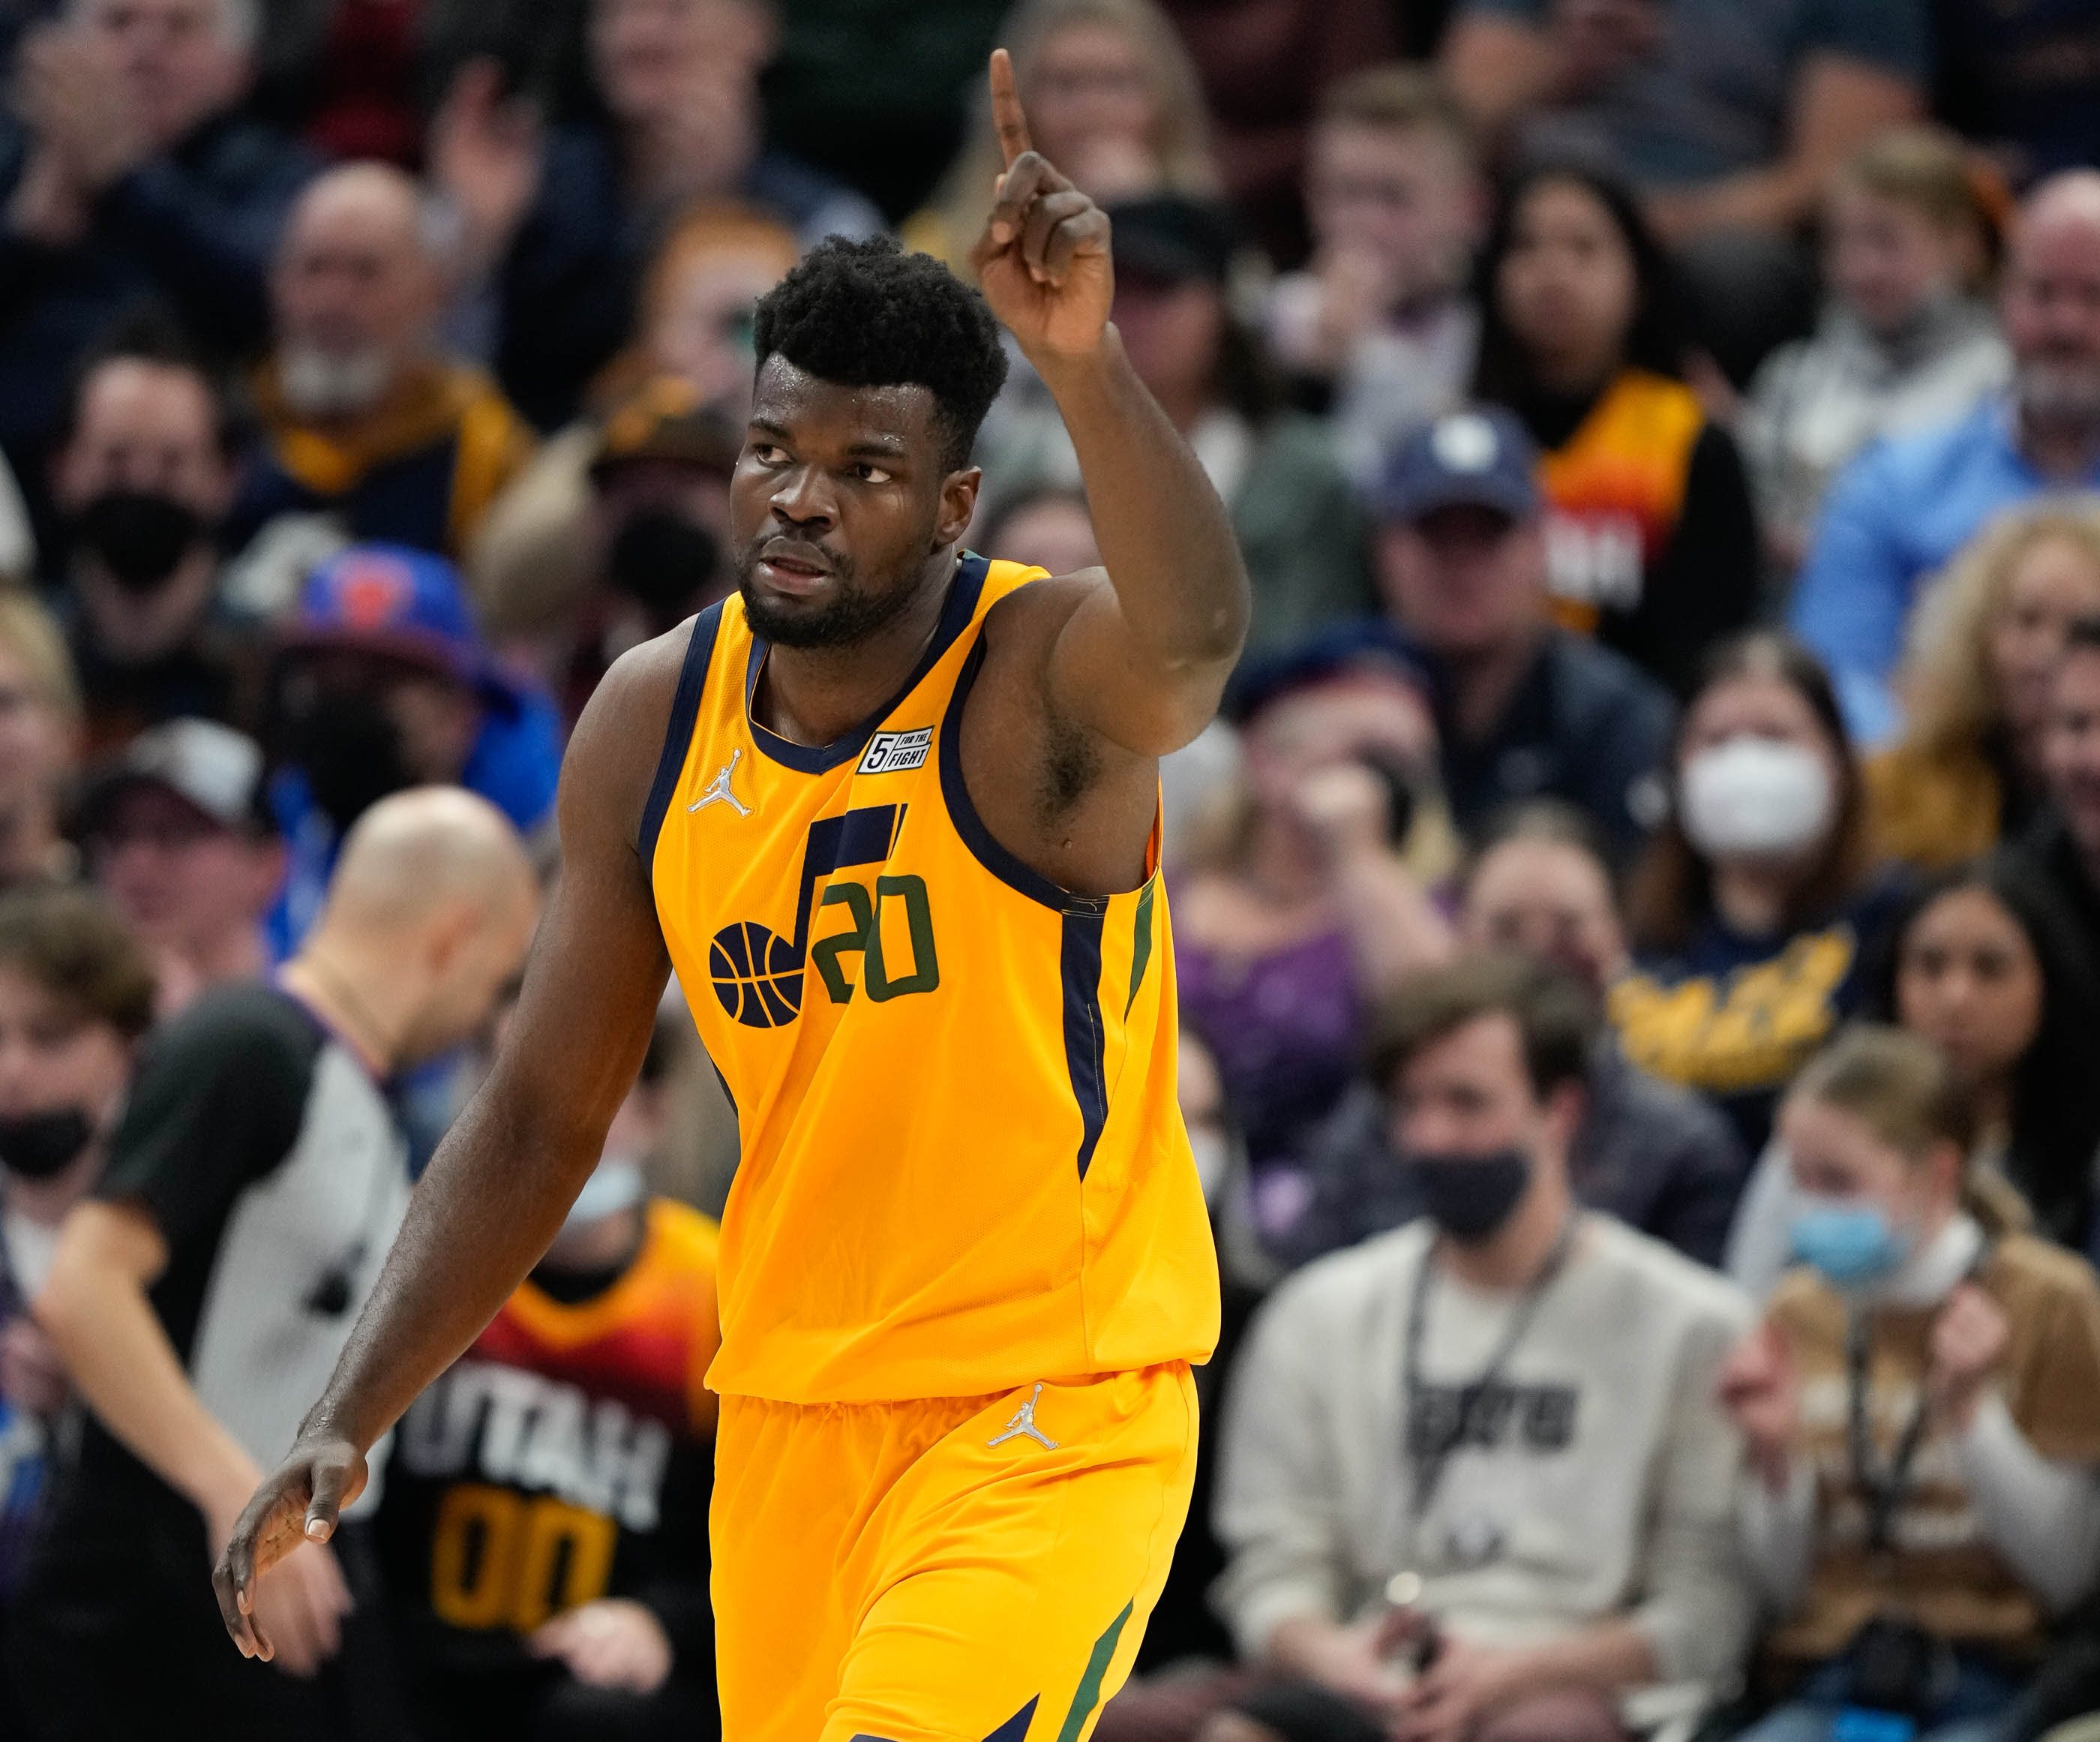 Utah Jazz's Udoka Azubuike suffers another right ankle injury in